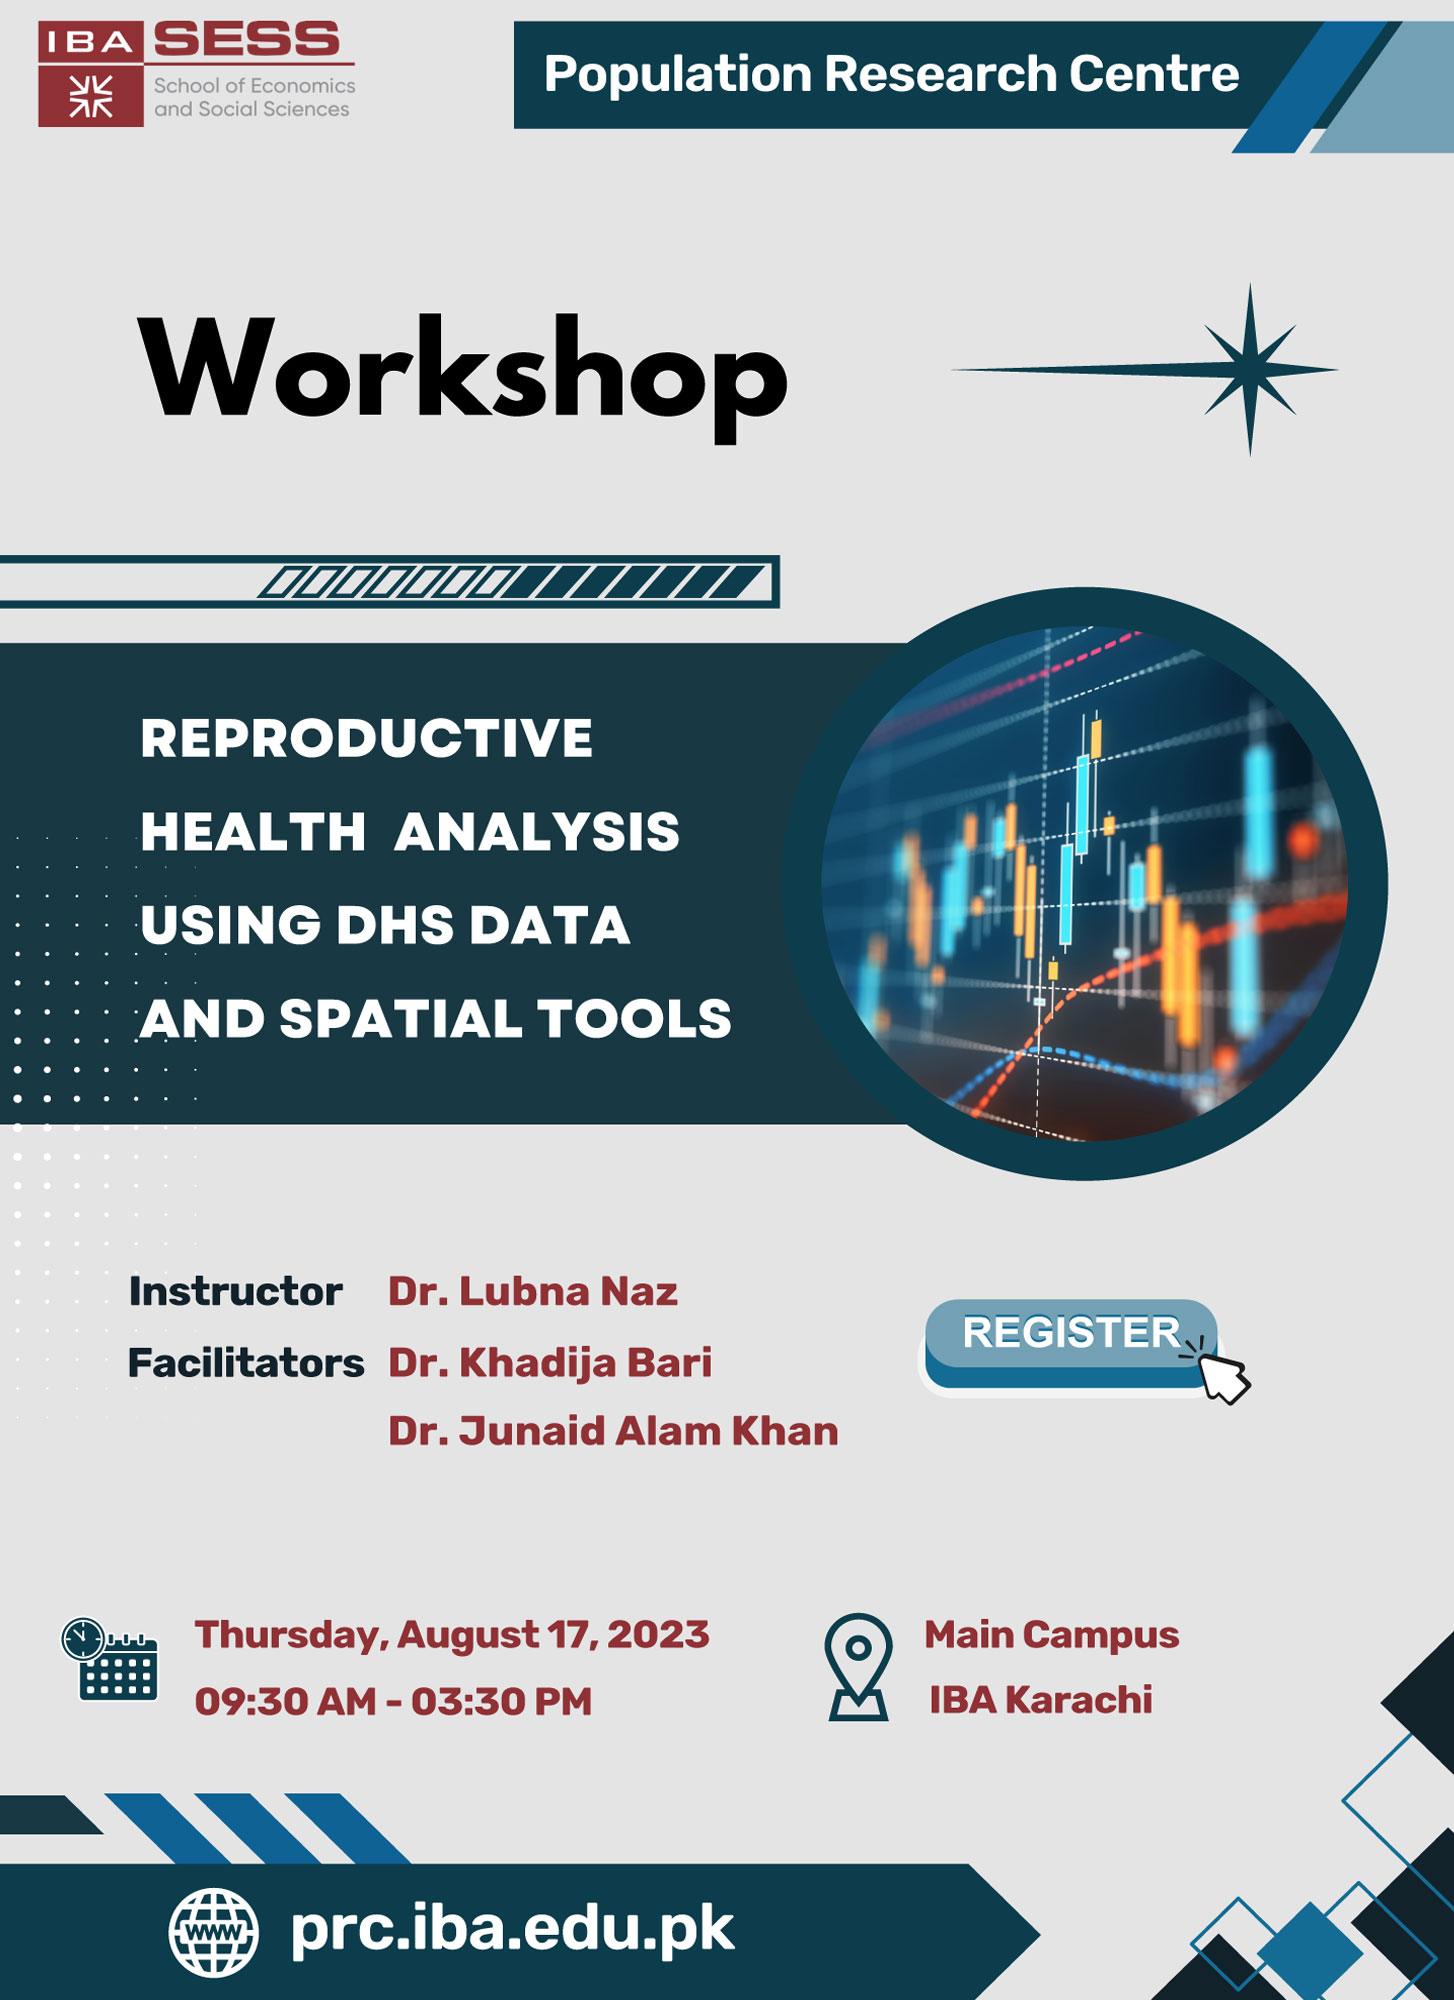 Worshop on Reproductive, Health Analysis, Using DHS Data and Spatial Tools